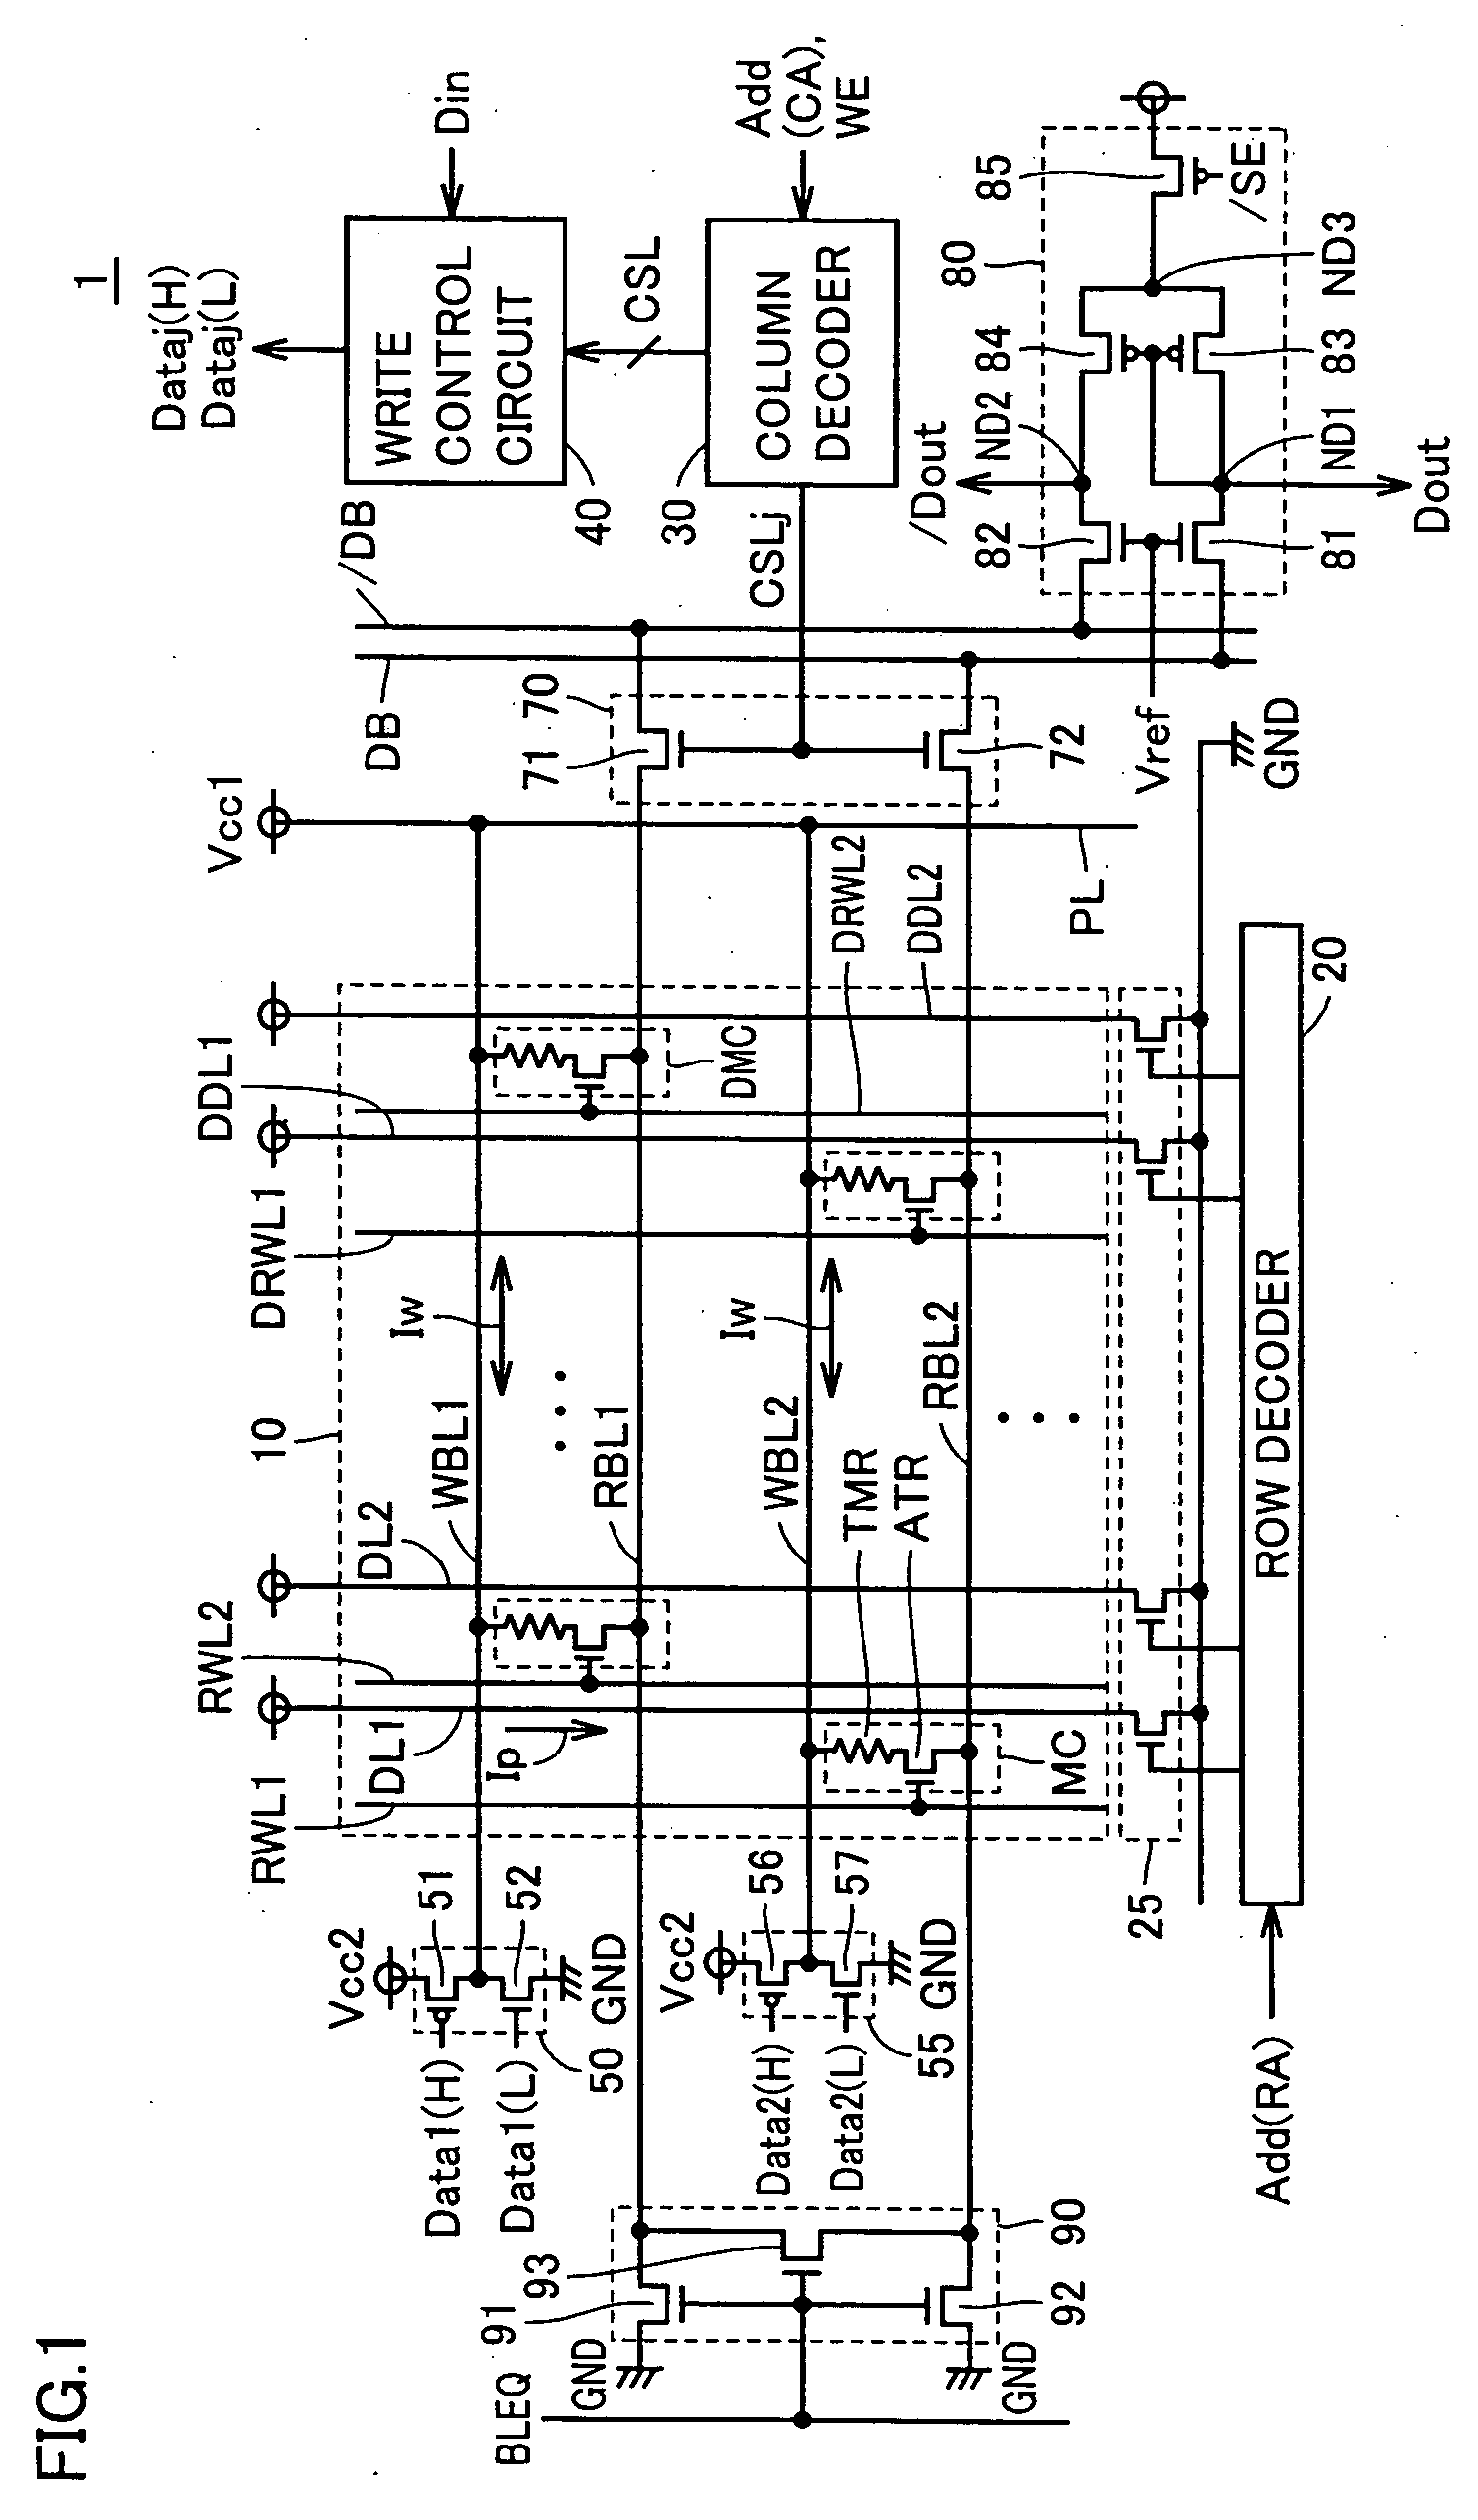 Semiconductor memory device with current driver providing bi-directional current to data write line